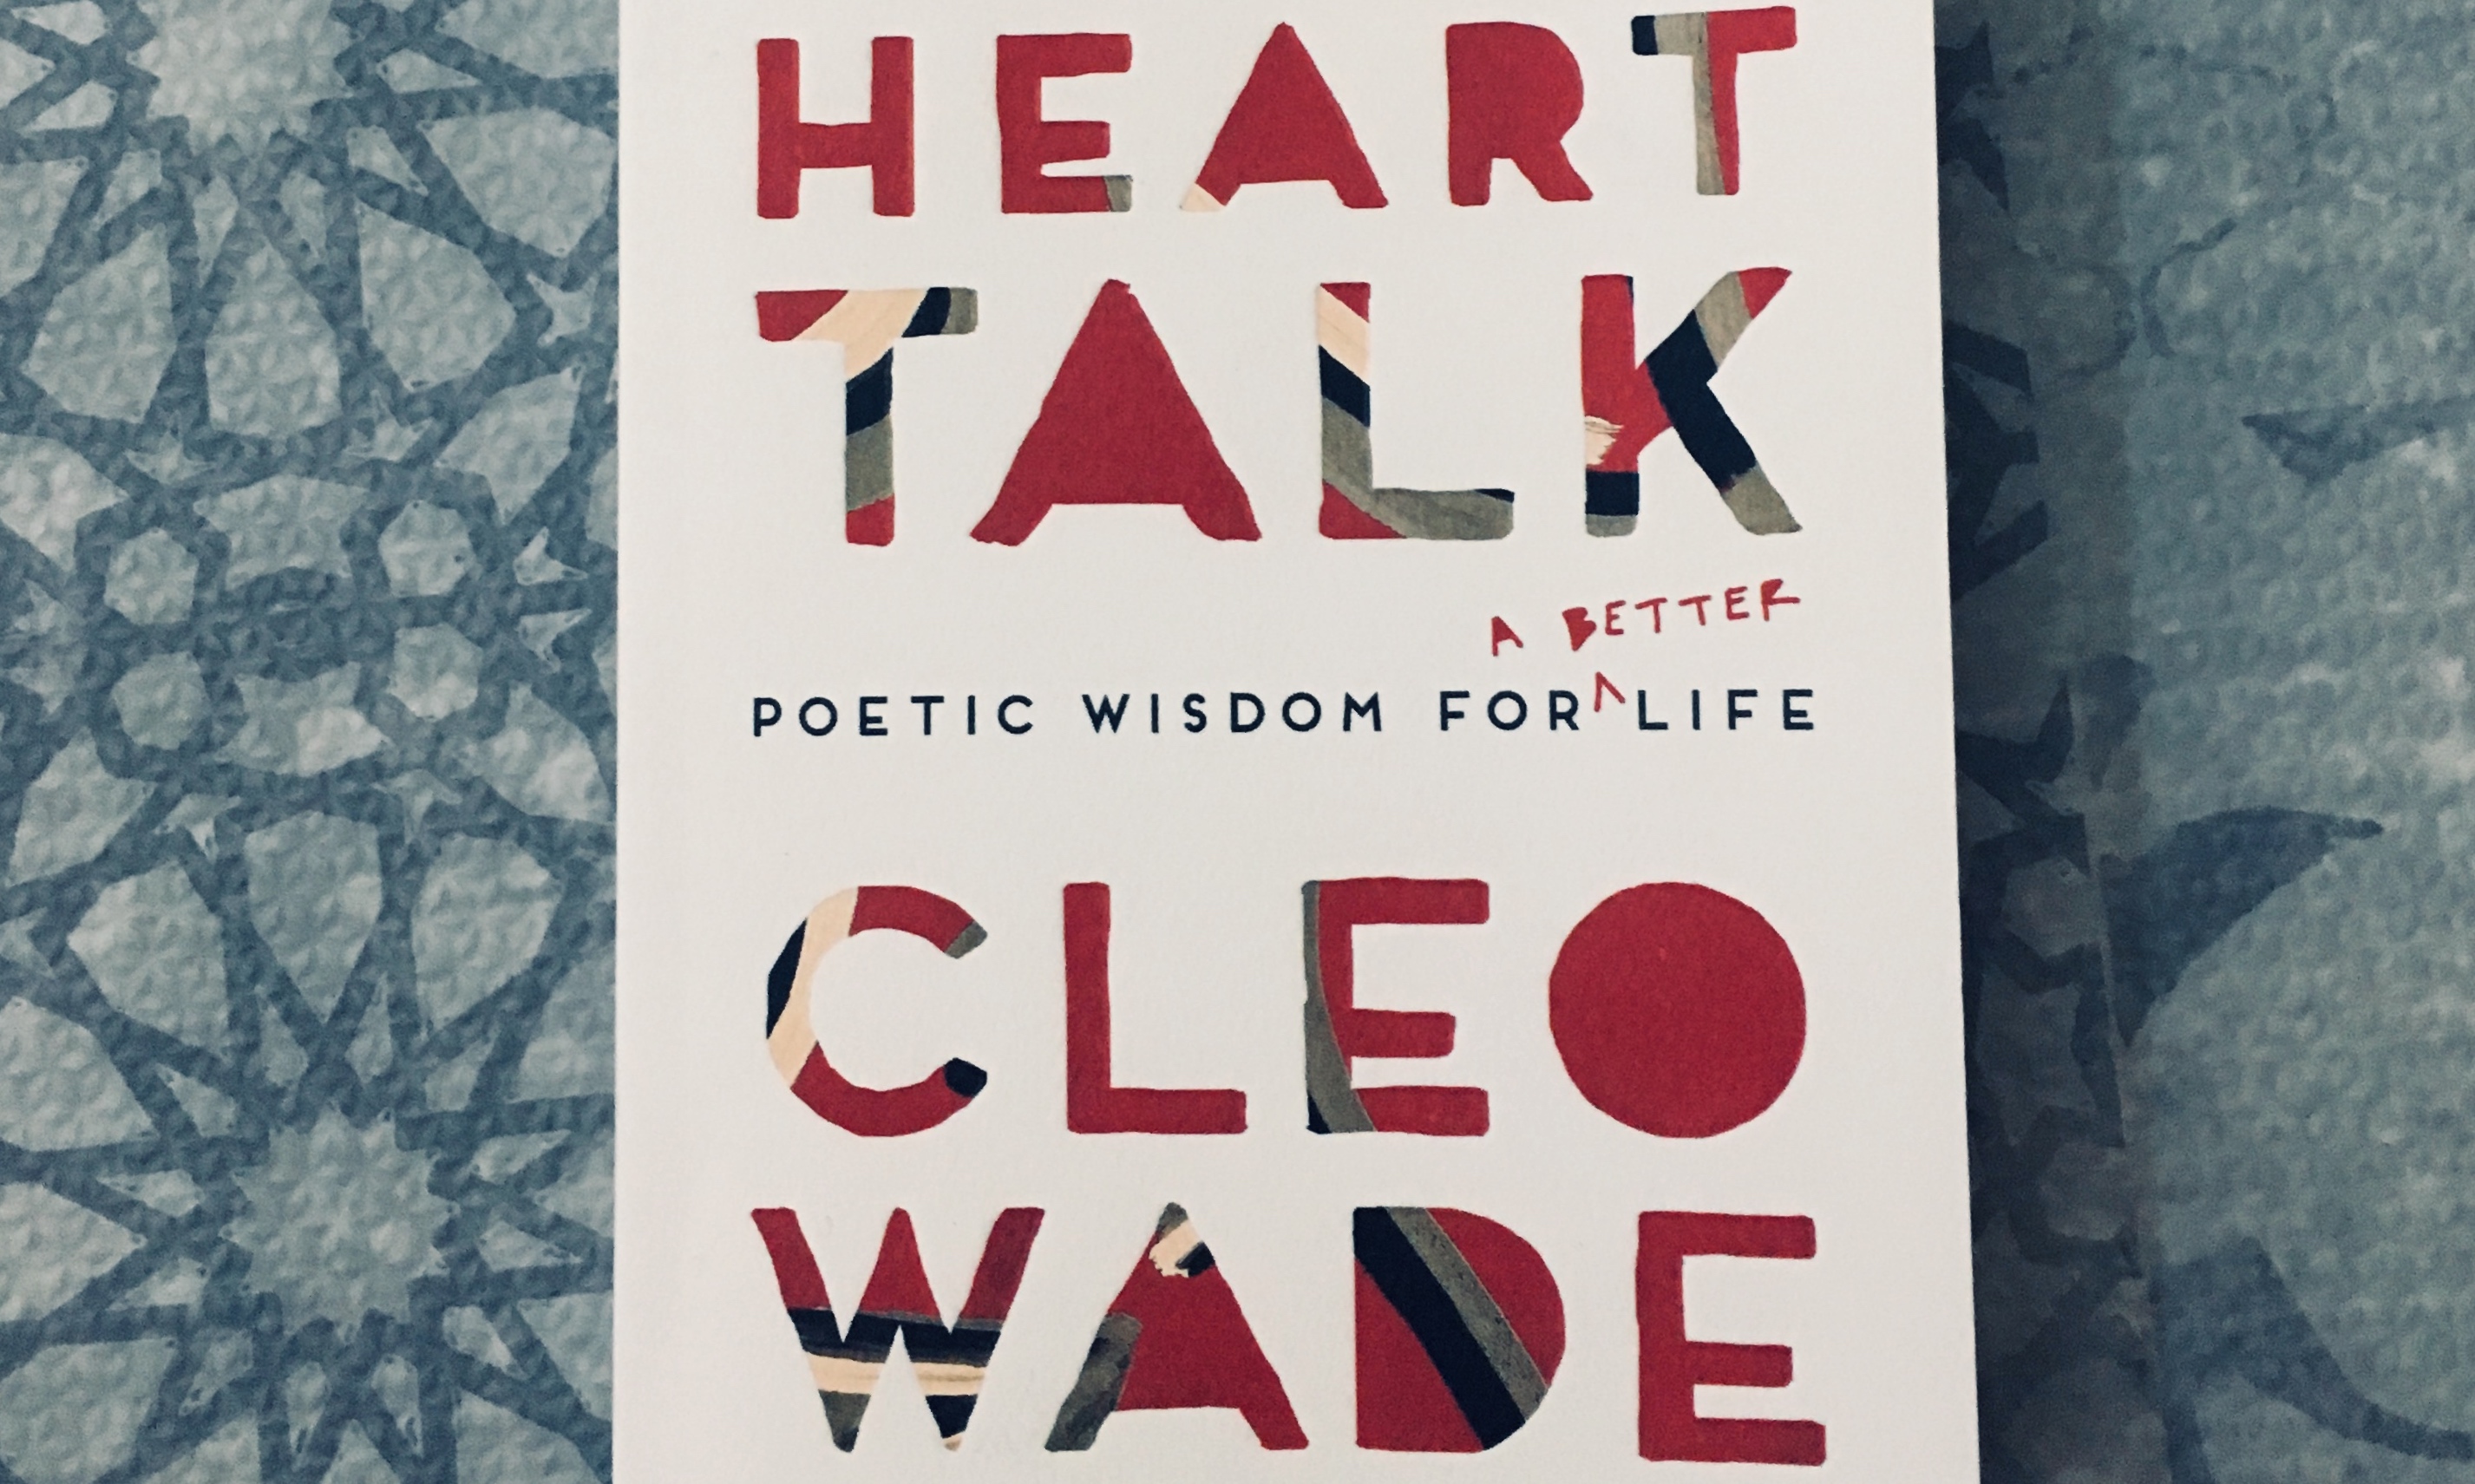 Heart Talk: Poetic Wisdom For a Better Life by Cleo Wade